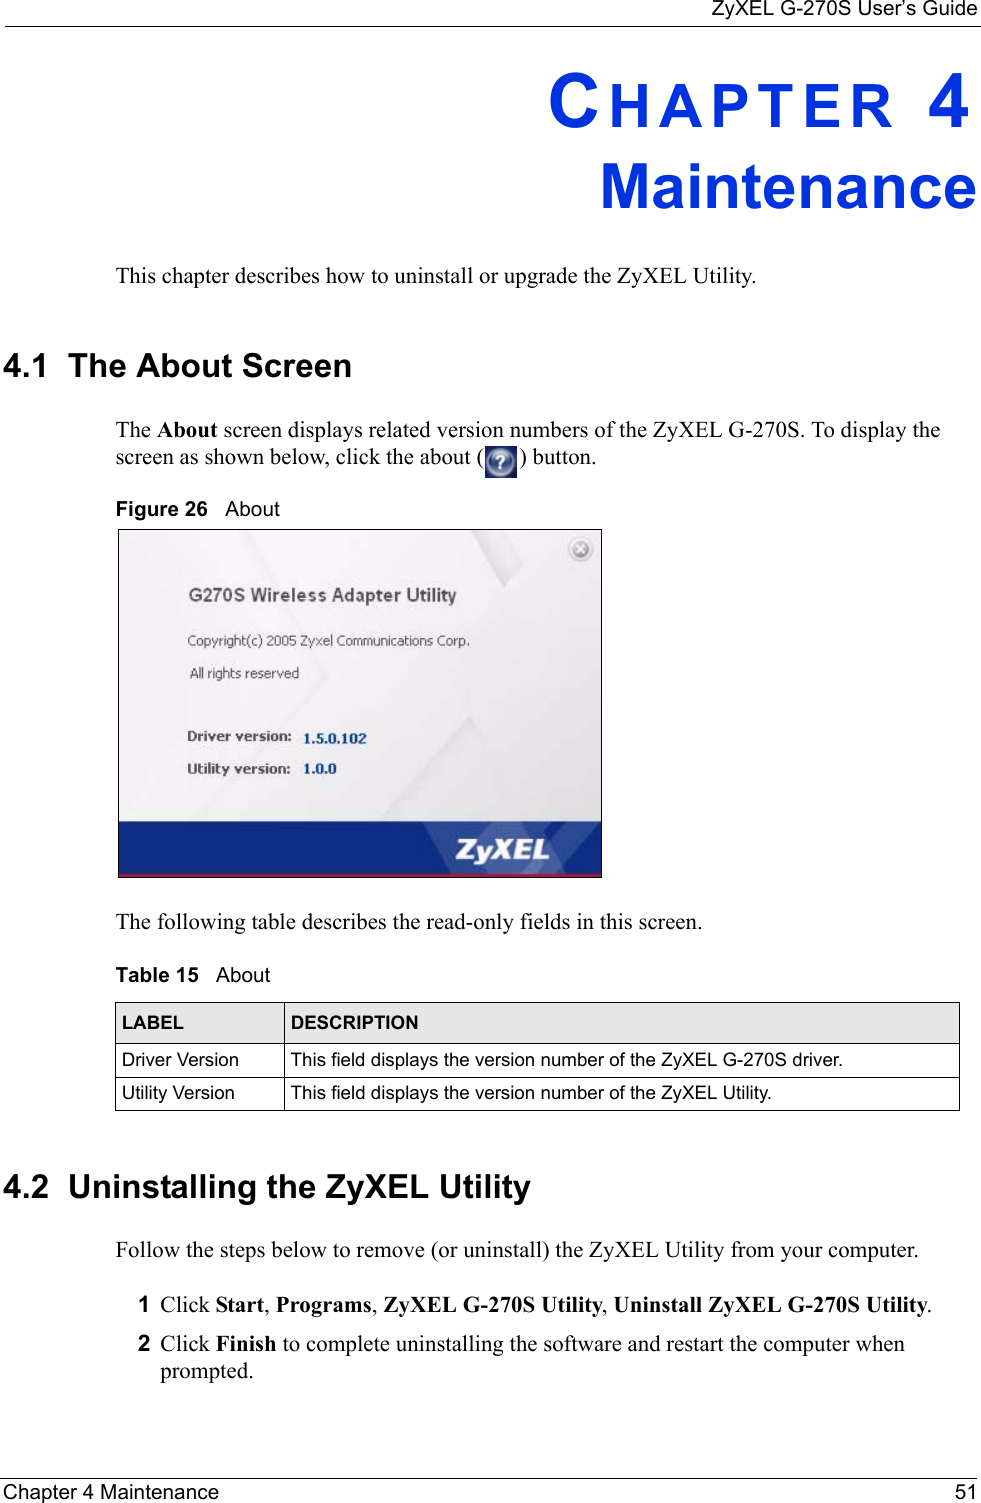 ZyXEL G-270S User’s GuideChapter 4 Maintenance 51CHAPTER 4MaintenanceThis chapter describes how to uninstall or upgrade the ZyXEL Utility.4.1  The About Screen The About screen displays related version numbers of the ZyXEL G-270S. To display the screen as shown below, click the about ( ) button.Figure 26   About The following table describes the read-only fields in this screen. 4.2  Uninstalling the ZyXEL Utility Follow the steps below to remove (or uninstall) the ZyXEL Utility from your computer.1Click Start, Programs, ZyXEL G-270S Utility, Uninstall ZyXEL G-270S Utility.2Click Finish to complete uninstalling the software and restart the computer when prompted.Table 15   About LABEL DESCRIPTIONDriver Version This field displays the version number of the ZyXEL G-270S driver.Utility Version This field displays the version number of the ZyXEL Utility.